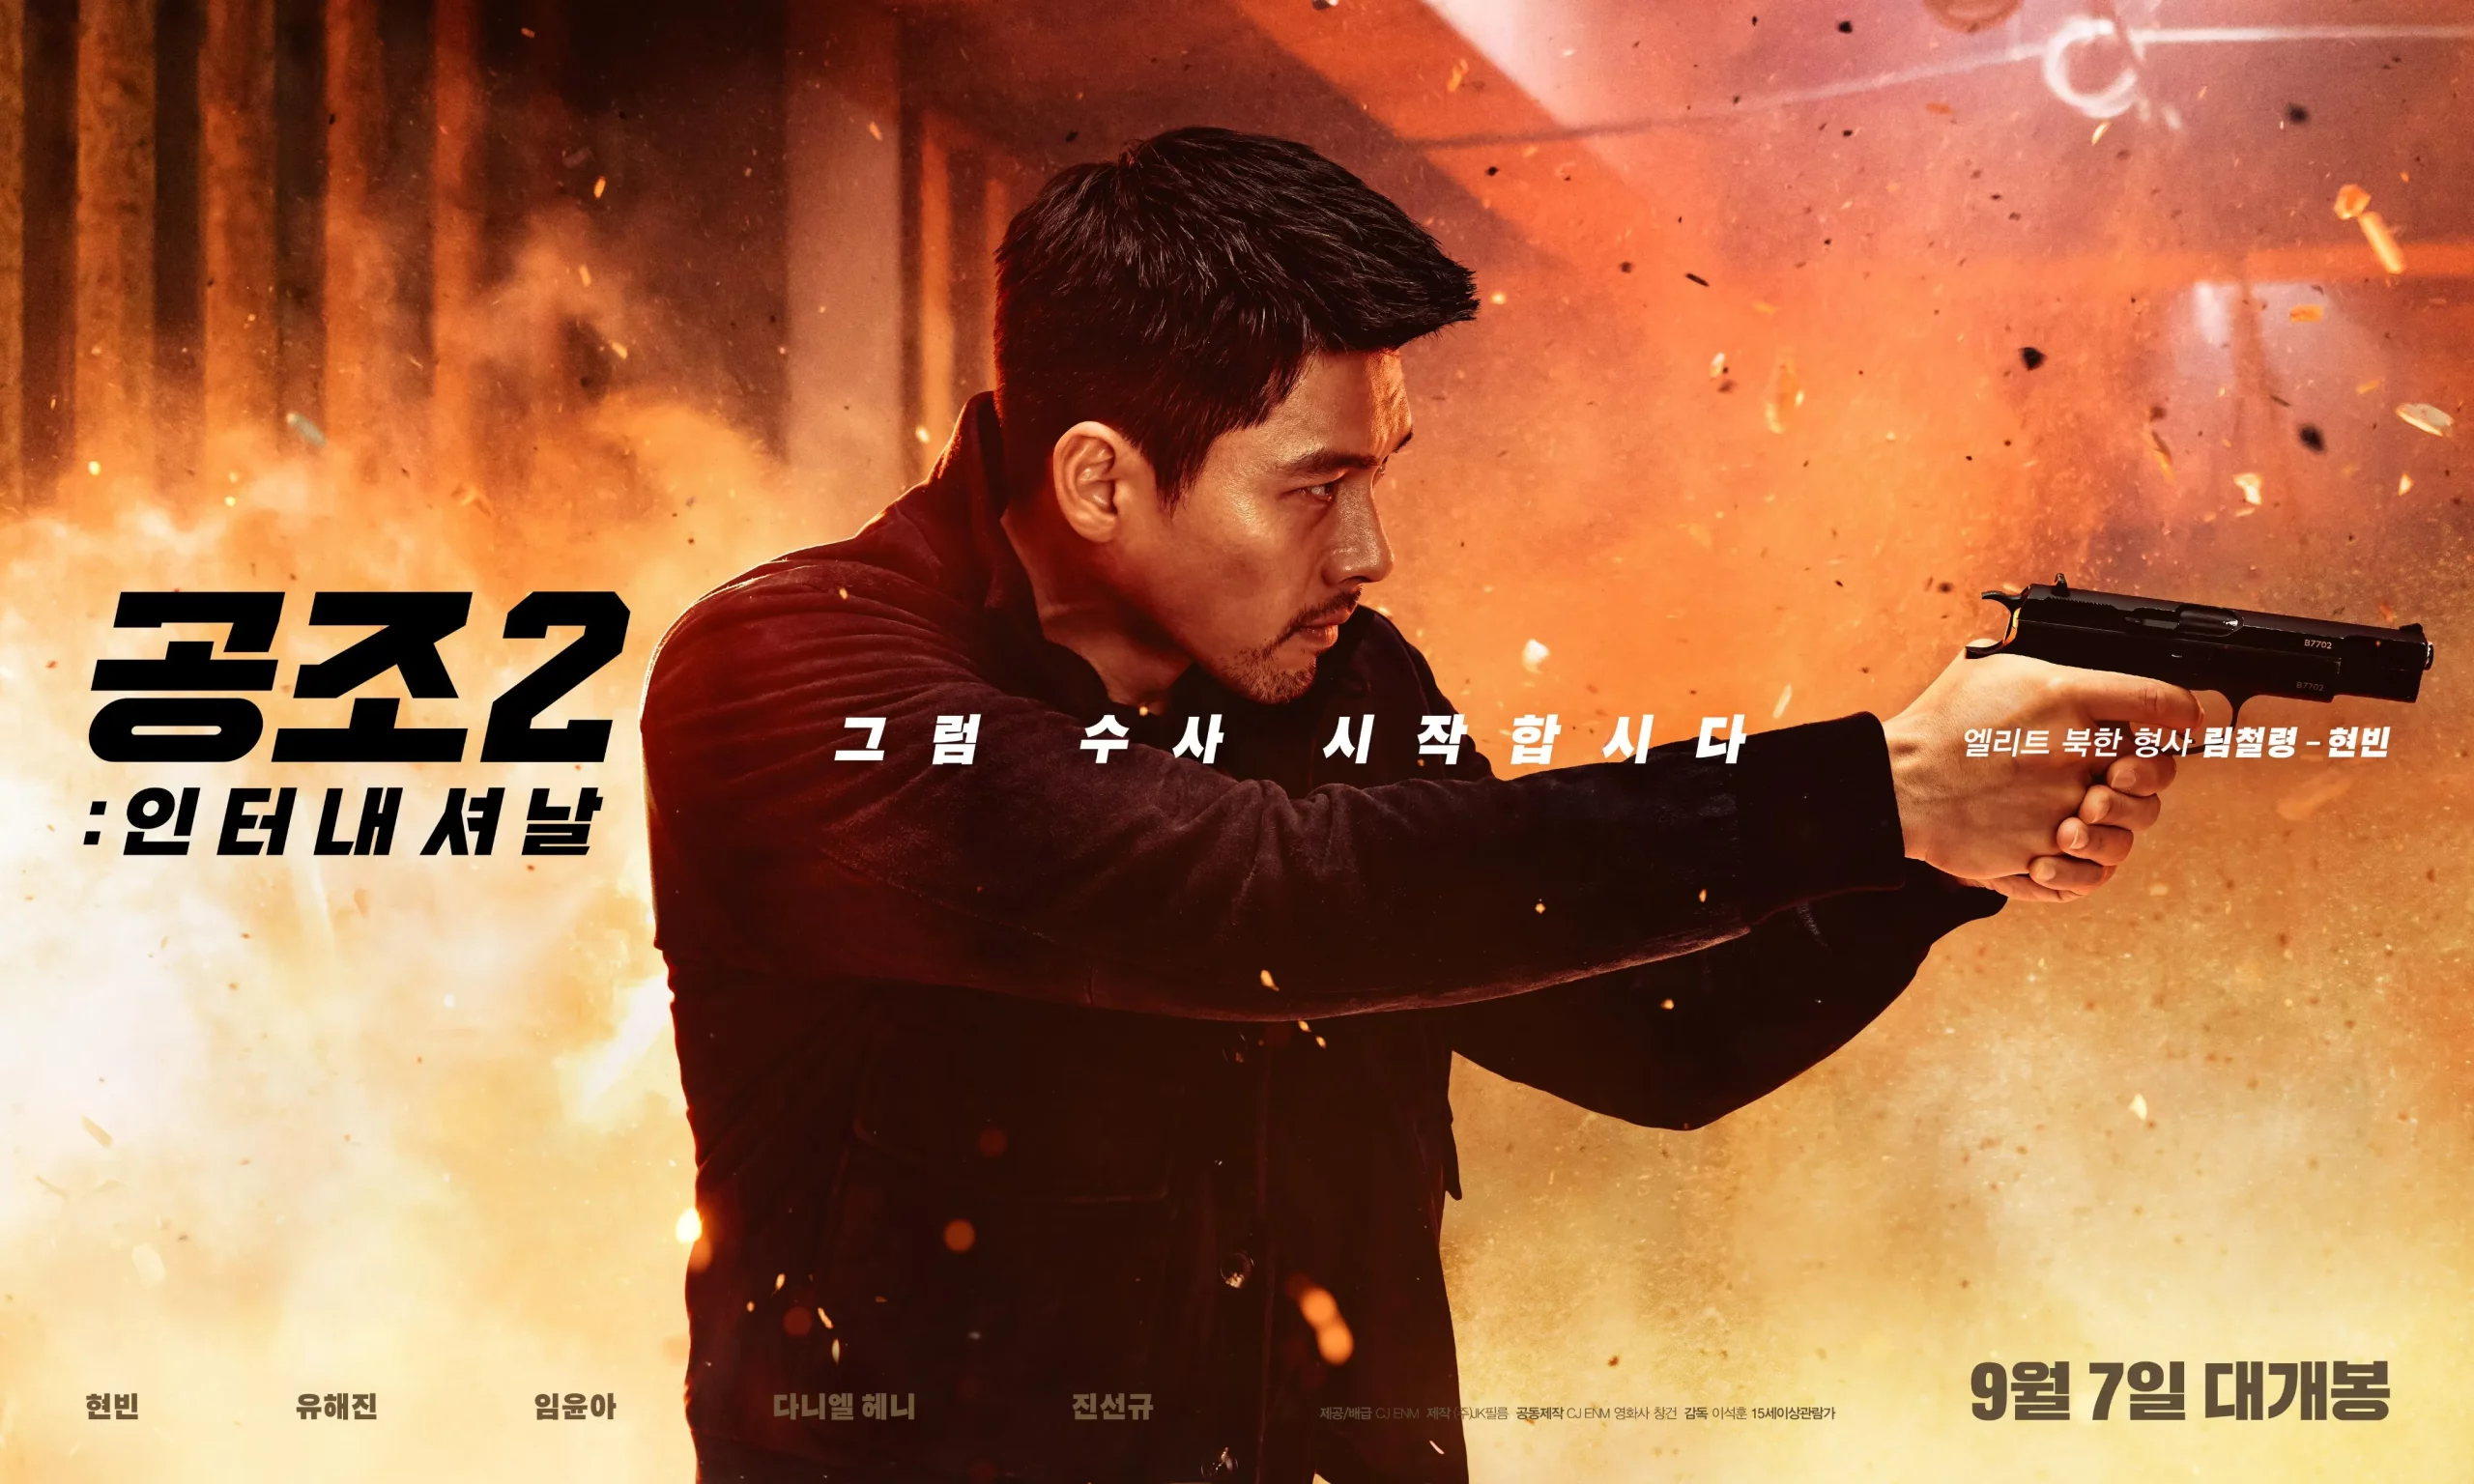 Character teaser and poster for "Confidential Assignment 2: International", released in South Korea on September 7 | FMV6